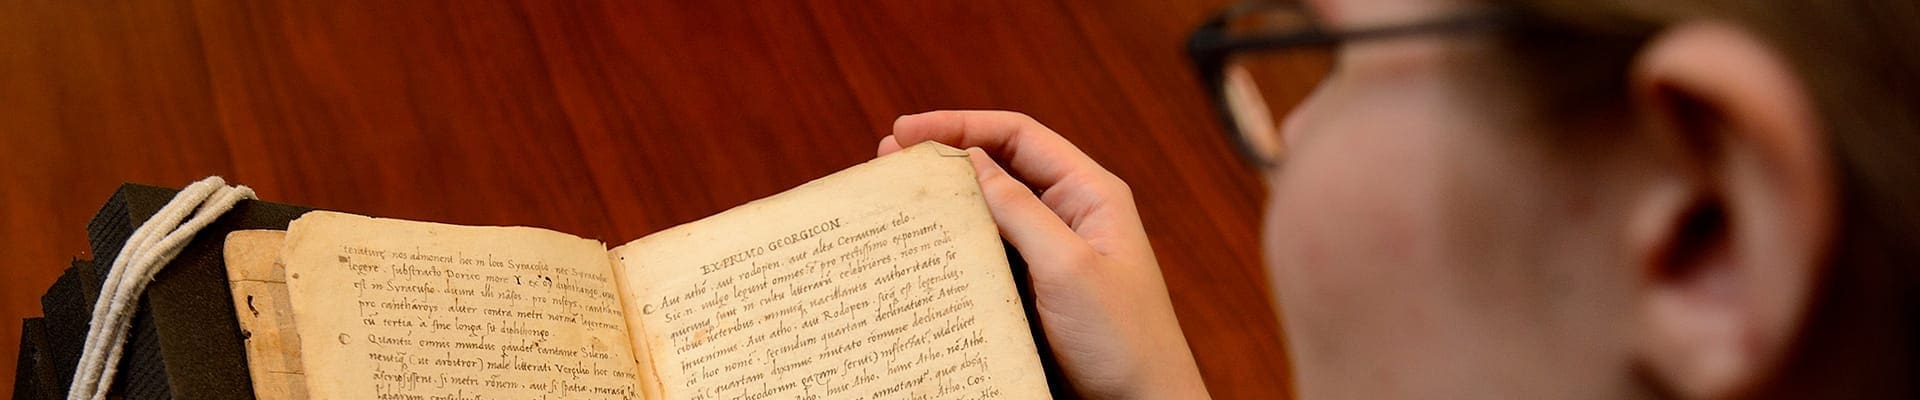 A student looks at a copy of Virgil’s works printed in Venice in 1507 that is part of the university’s rare book collection.